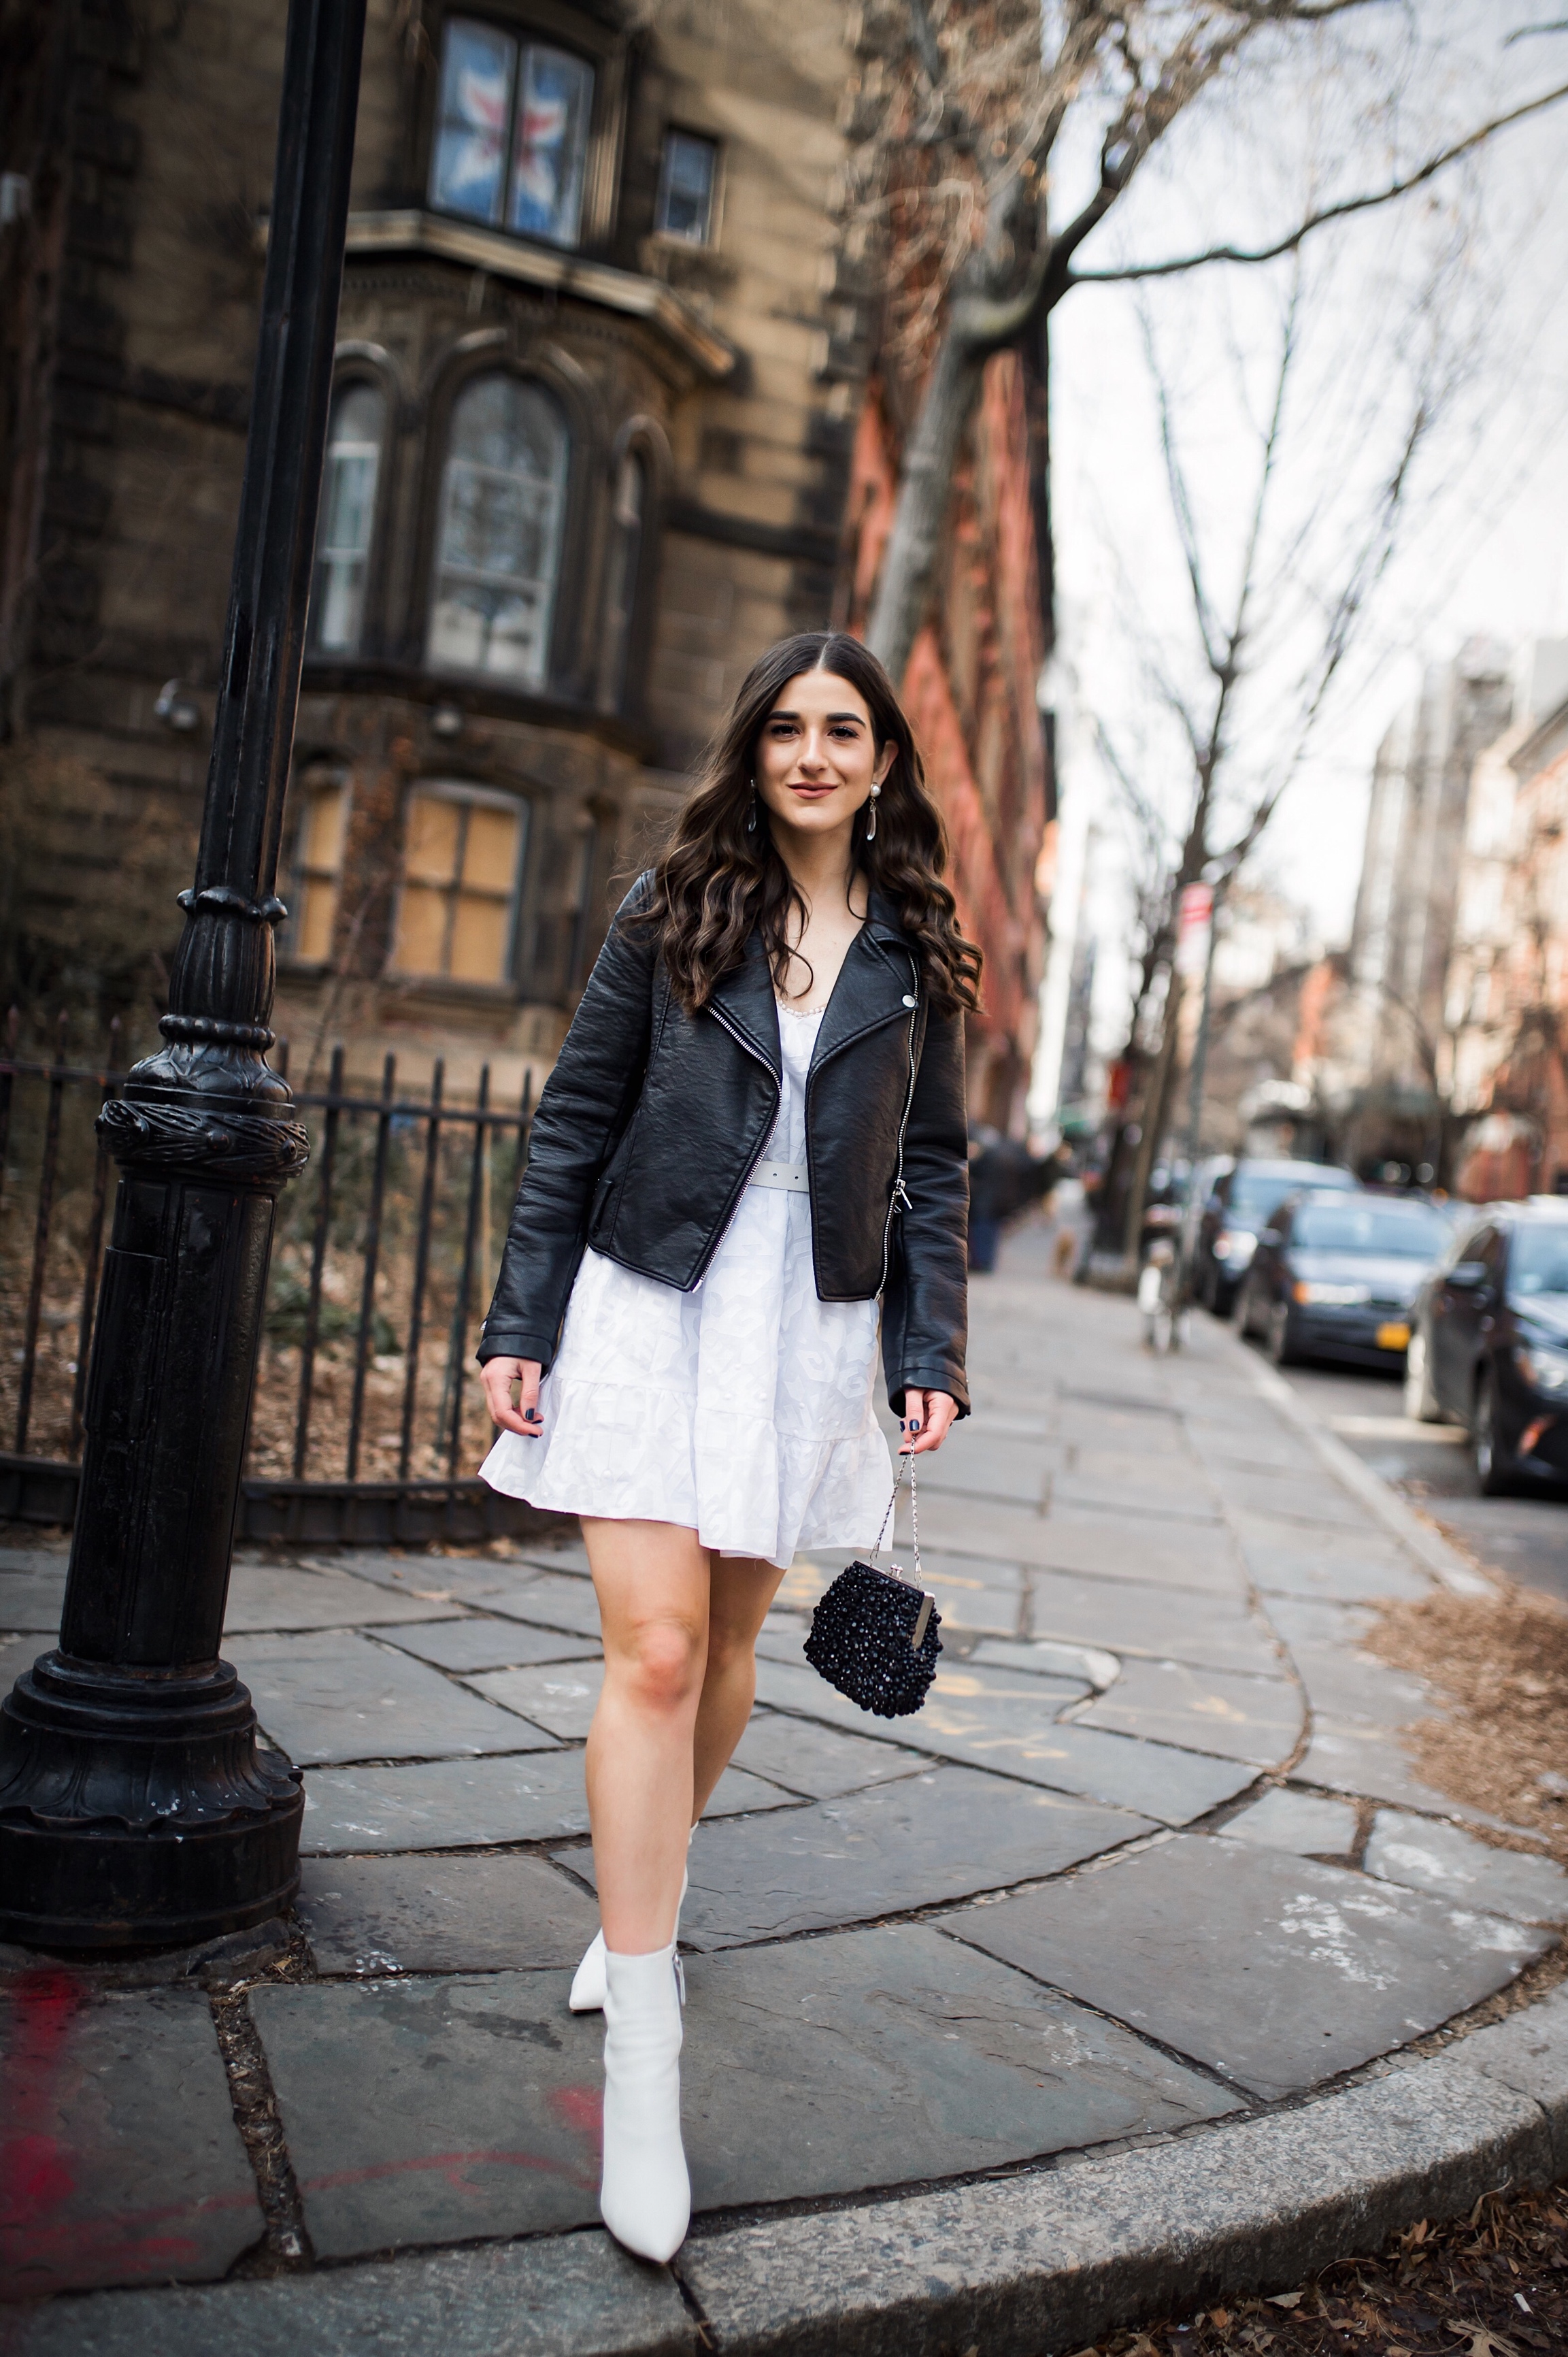 5 Things I Wish Brands Knew White Dress Leather Jacket Esther Santer Fashion Blog NYC Street Style Blogger Outfit OOTD Trendy Shopping Girl What How To Wear Urban Outfitters ASOS Belt Booties Black Beaded Clutch Long Hair Photoshoot  Stuyvesant  Shop.JPG